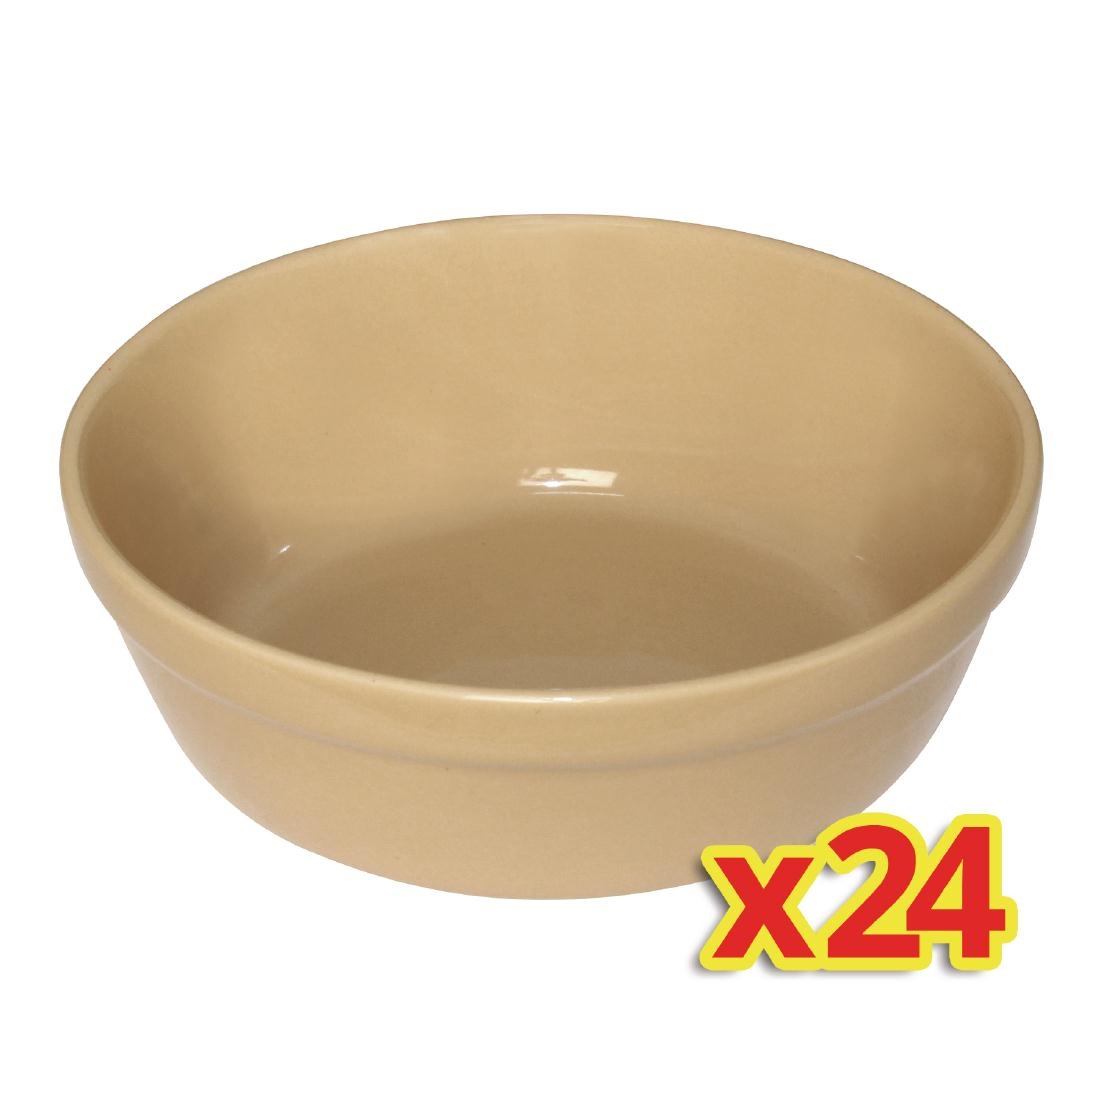 Special Offer - Olympia Round Earthenware Pie Bowls x24